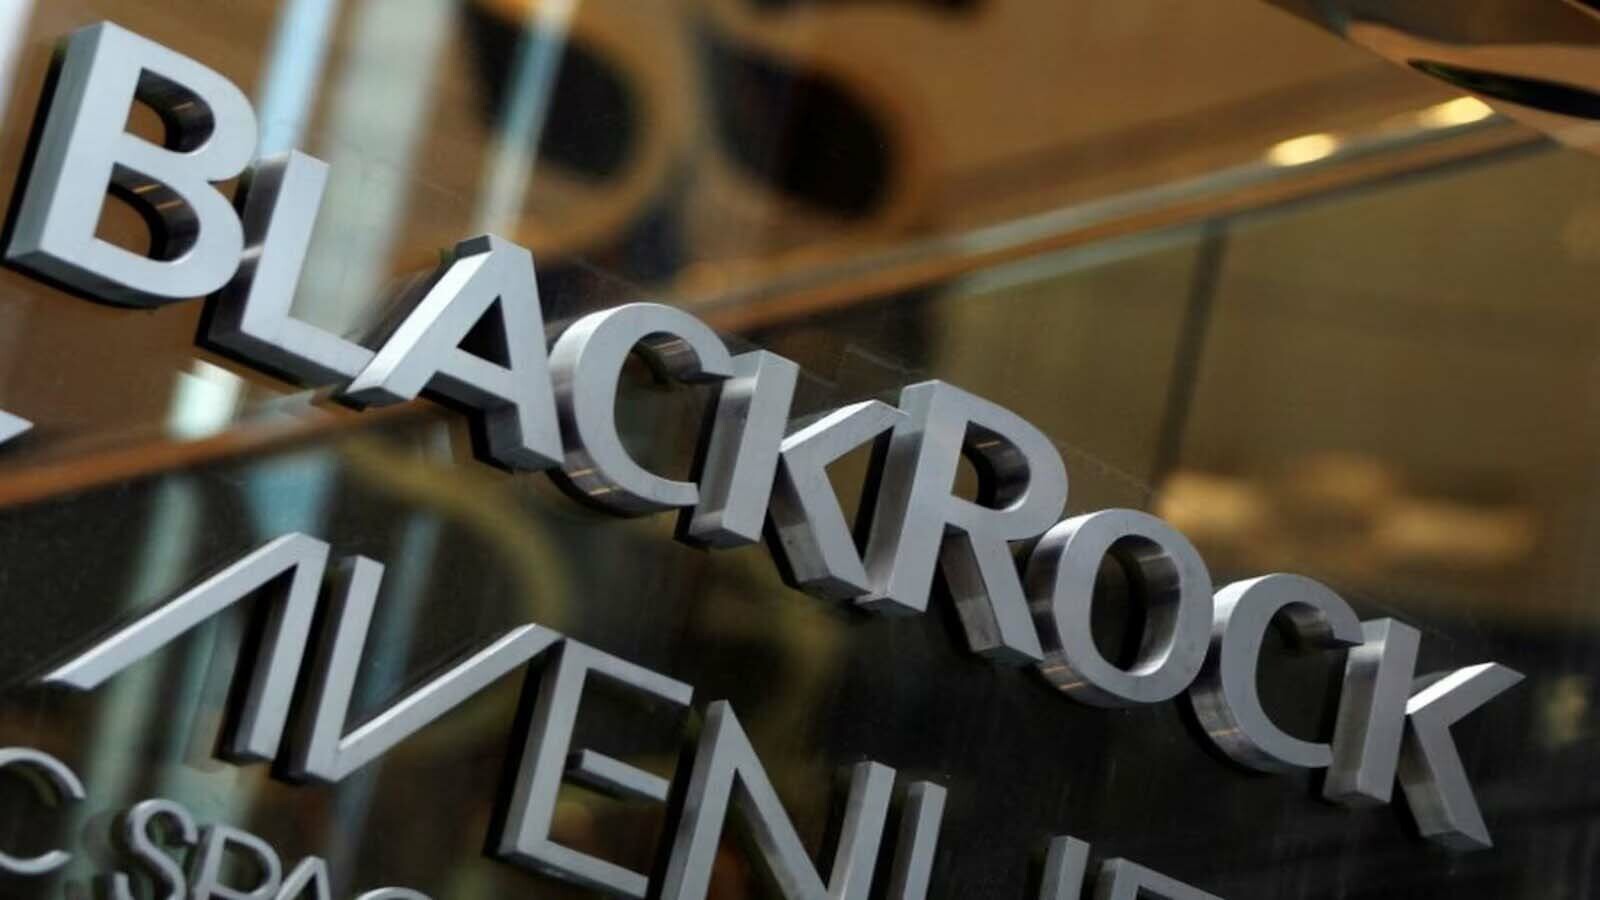 CRYPTONEWSBYTES.COM BlackRock1 BlackRock and JPMorgan Stealthily Prepare the Foundation for the Next Surge in Bitcoin, Ethereum, XRP, and Cryptocurrency Prices  